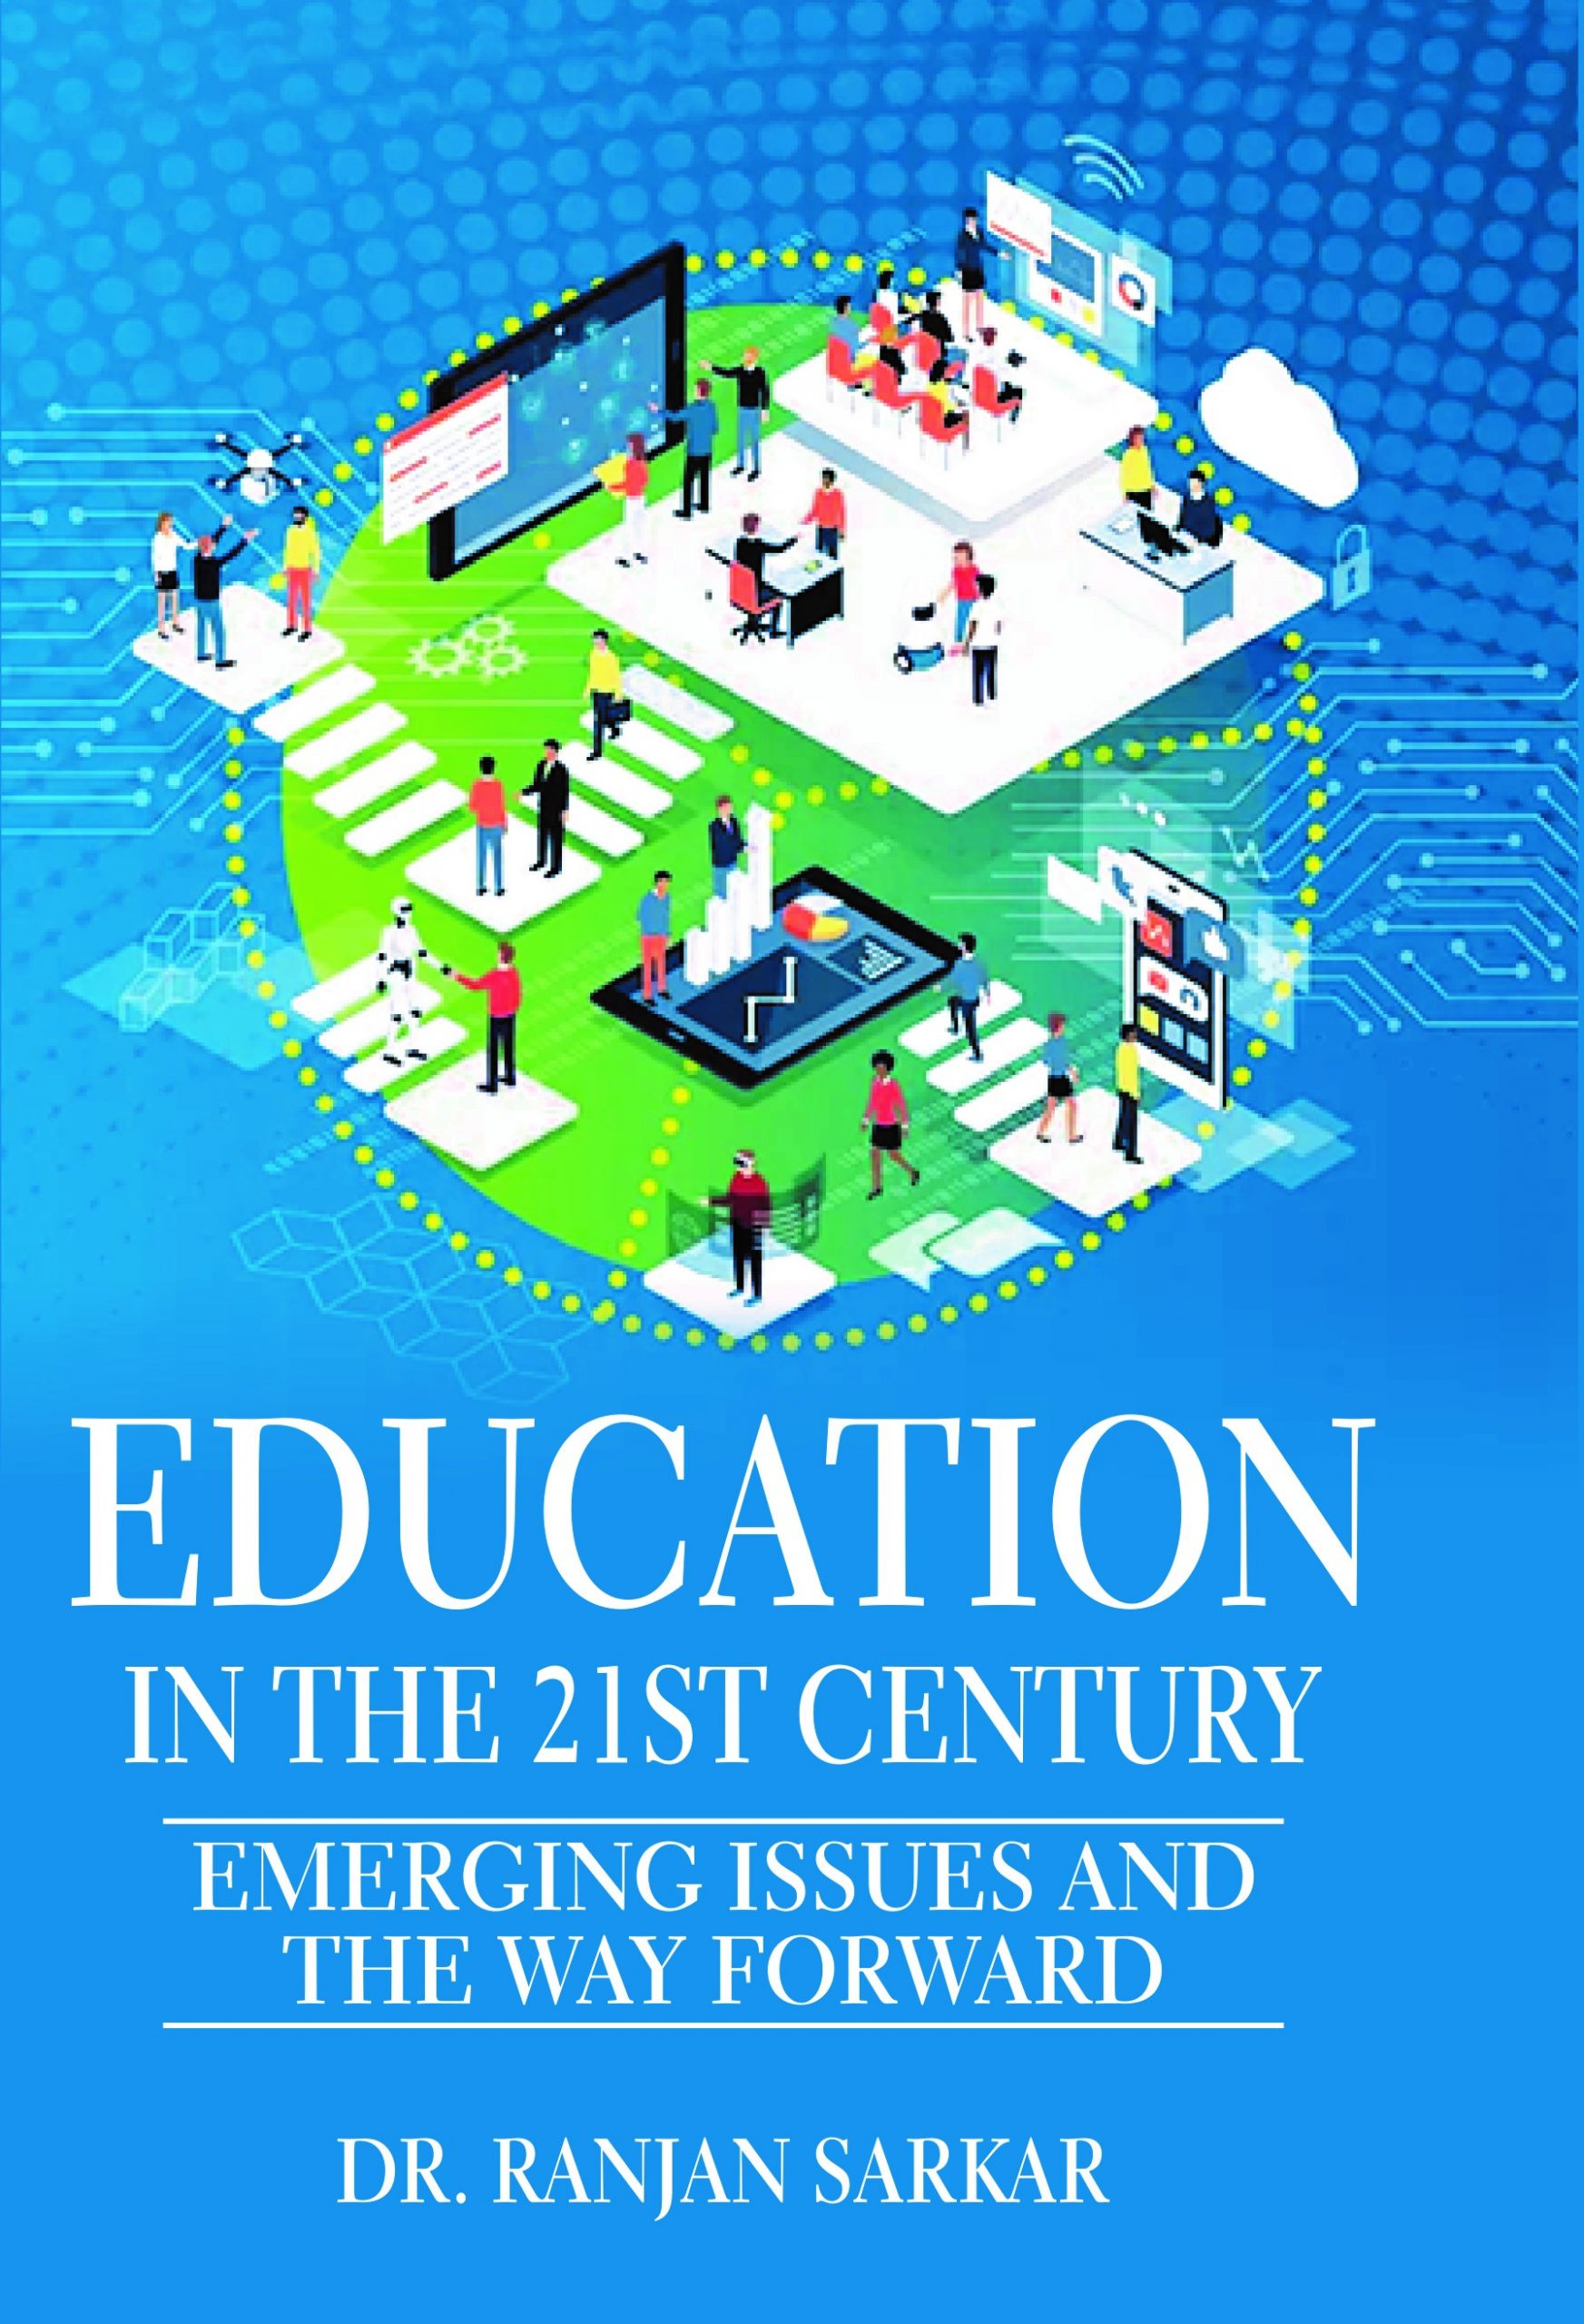 EDUCATION IN THE 21ST CENTURY EMERGING ISSUES AND THE WAY FORWARD